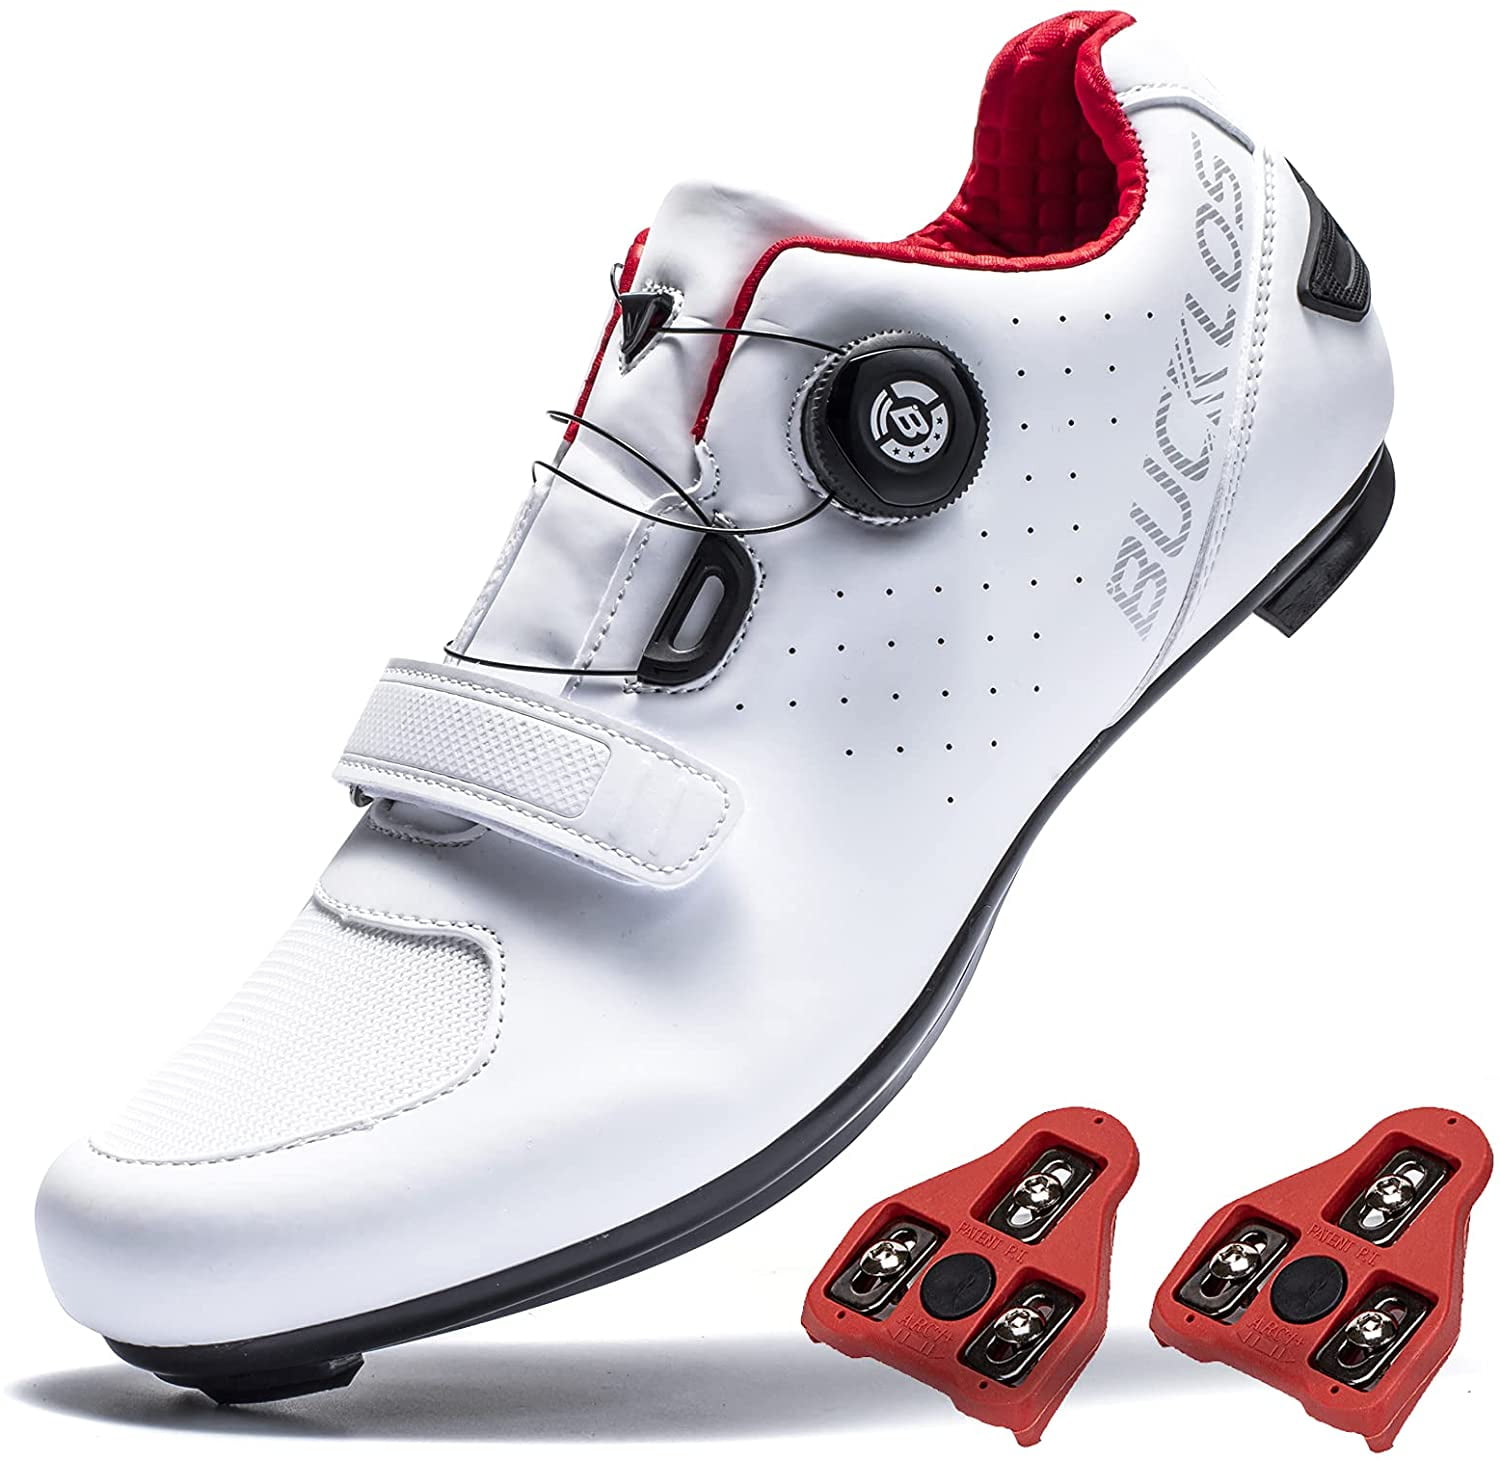 Cycling-Shoes Mountain,Road Cycling Support Mens SPD/SPD-SL Compatible Double Dial MTB Cleat Indoor Exercise Biking Breathable Anti-Slip Comfortable Riding Shoes 